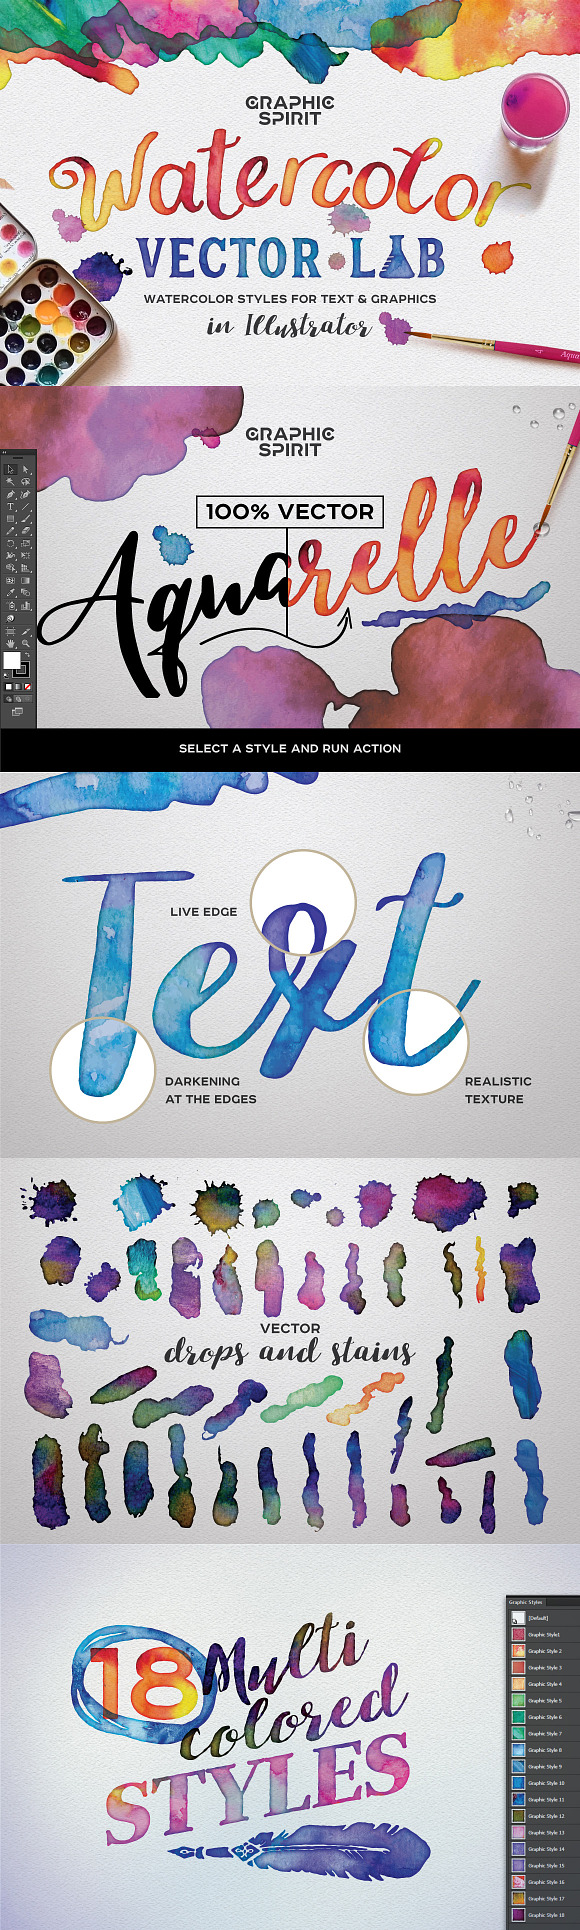 12 in 1 ILLUSTRATOR Bundle DISCOUNT in Photoshop Layer Styles - product preview 1